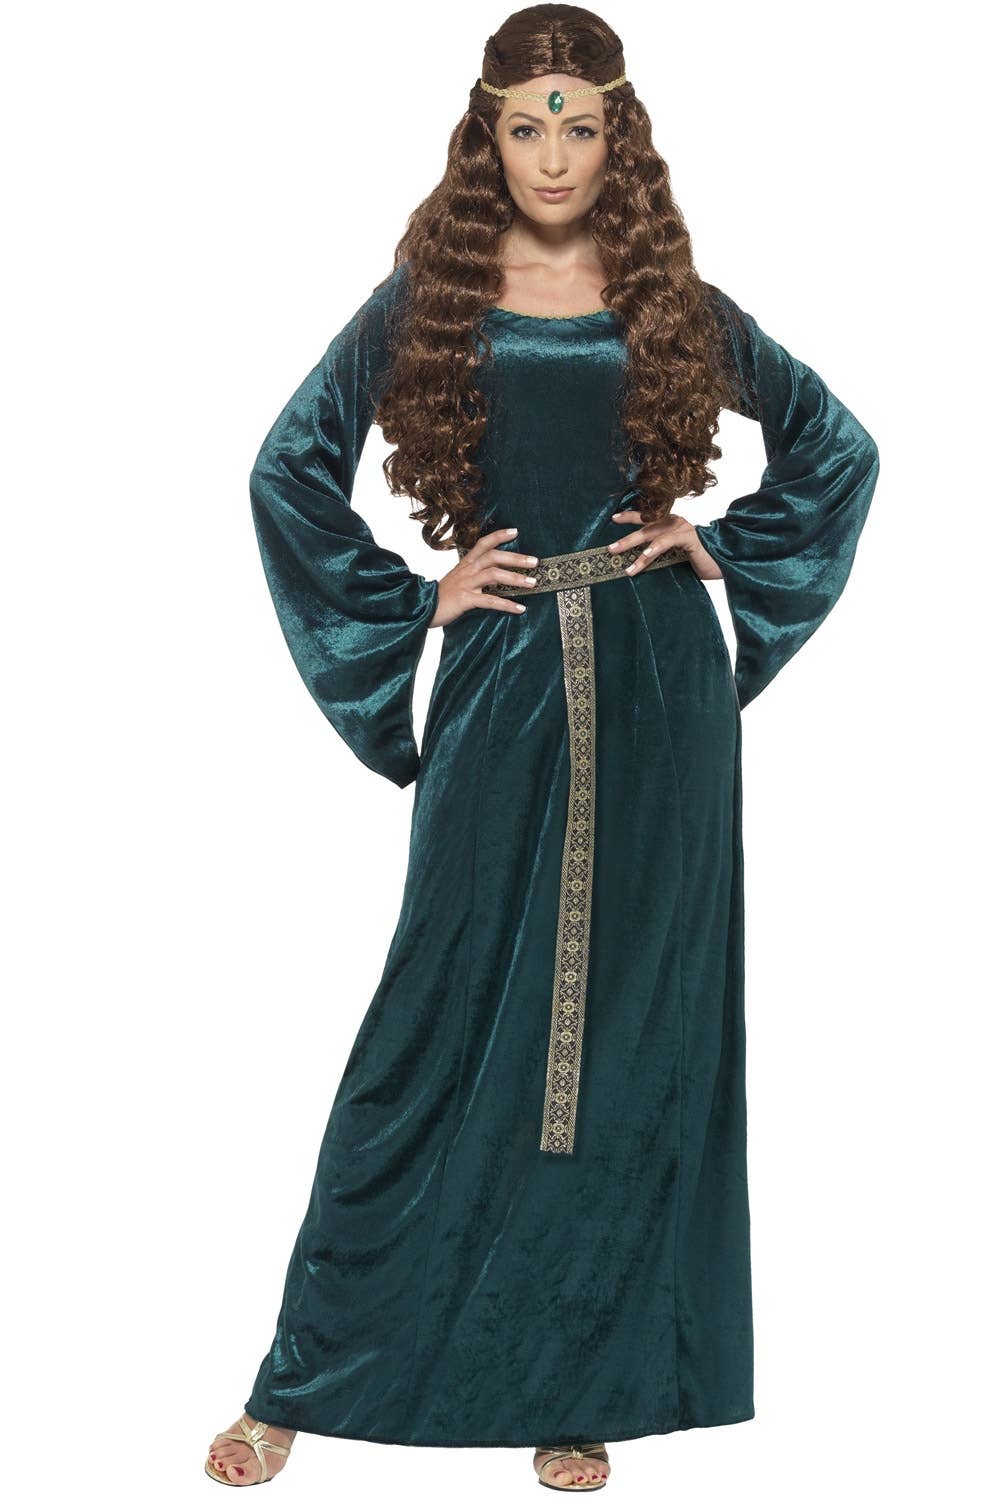 Women's Plus Size Green Medieval Costume Dress - Alternate Front Image